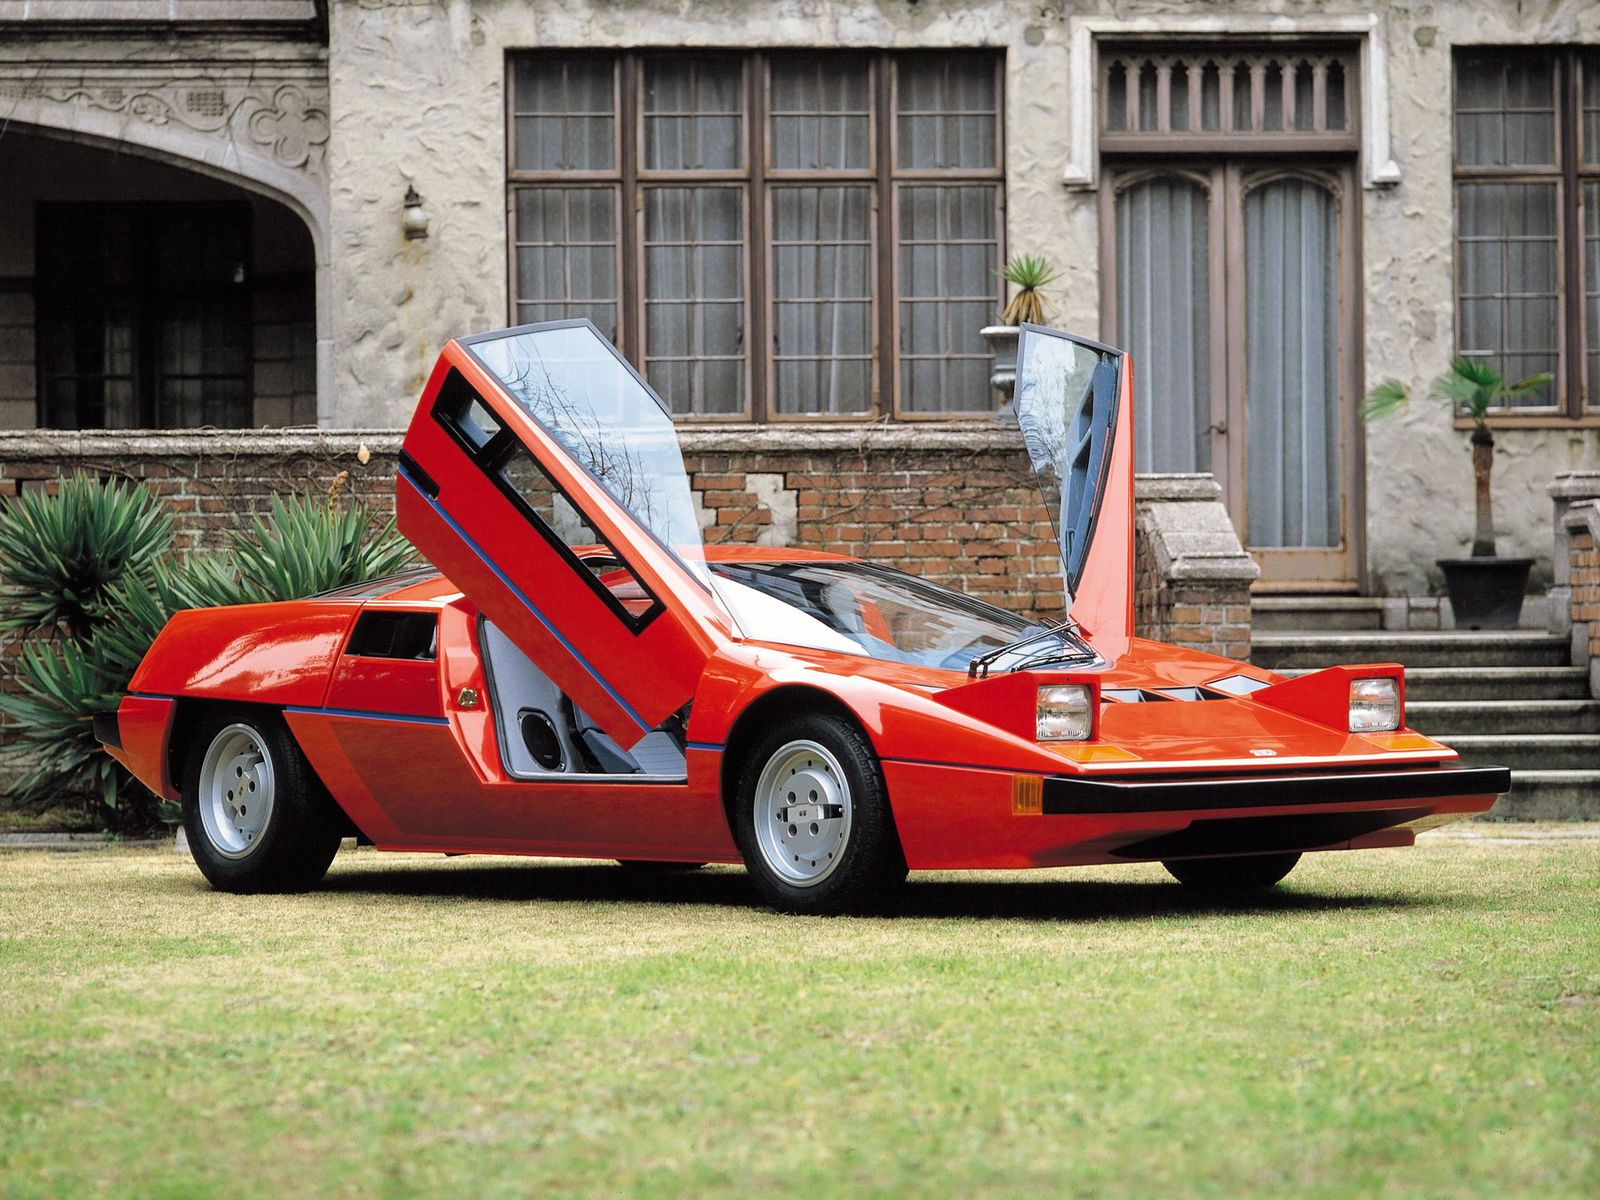 30 incredibly bonkers and beautiful cars from the 1950s to now image 12